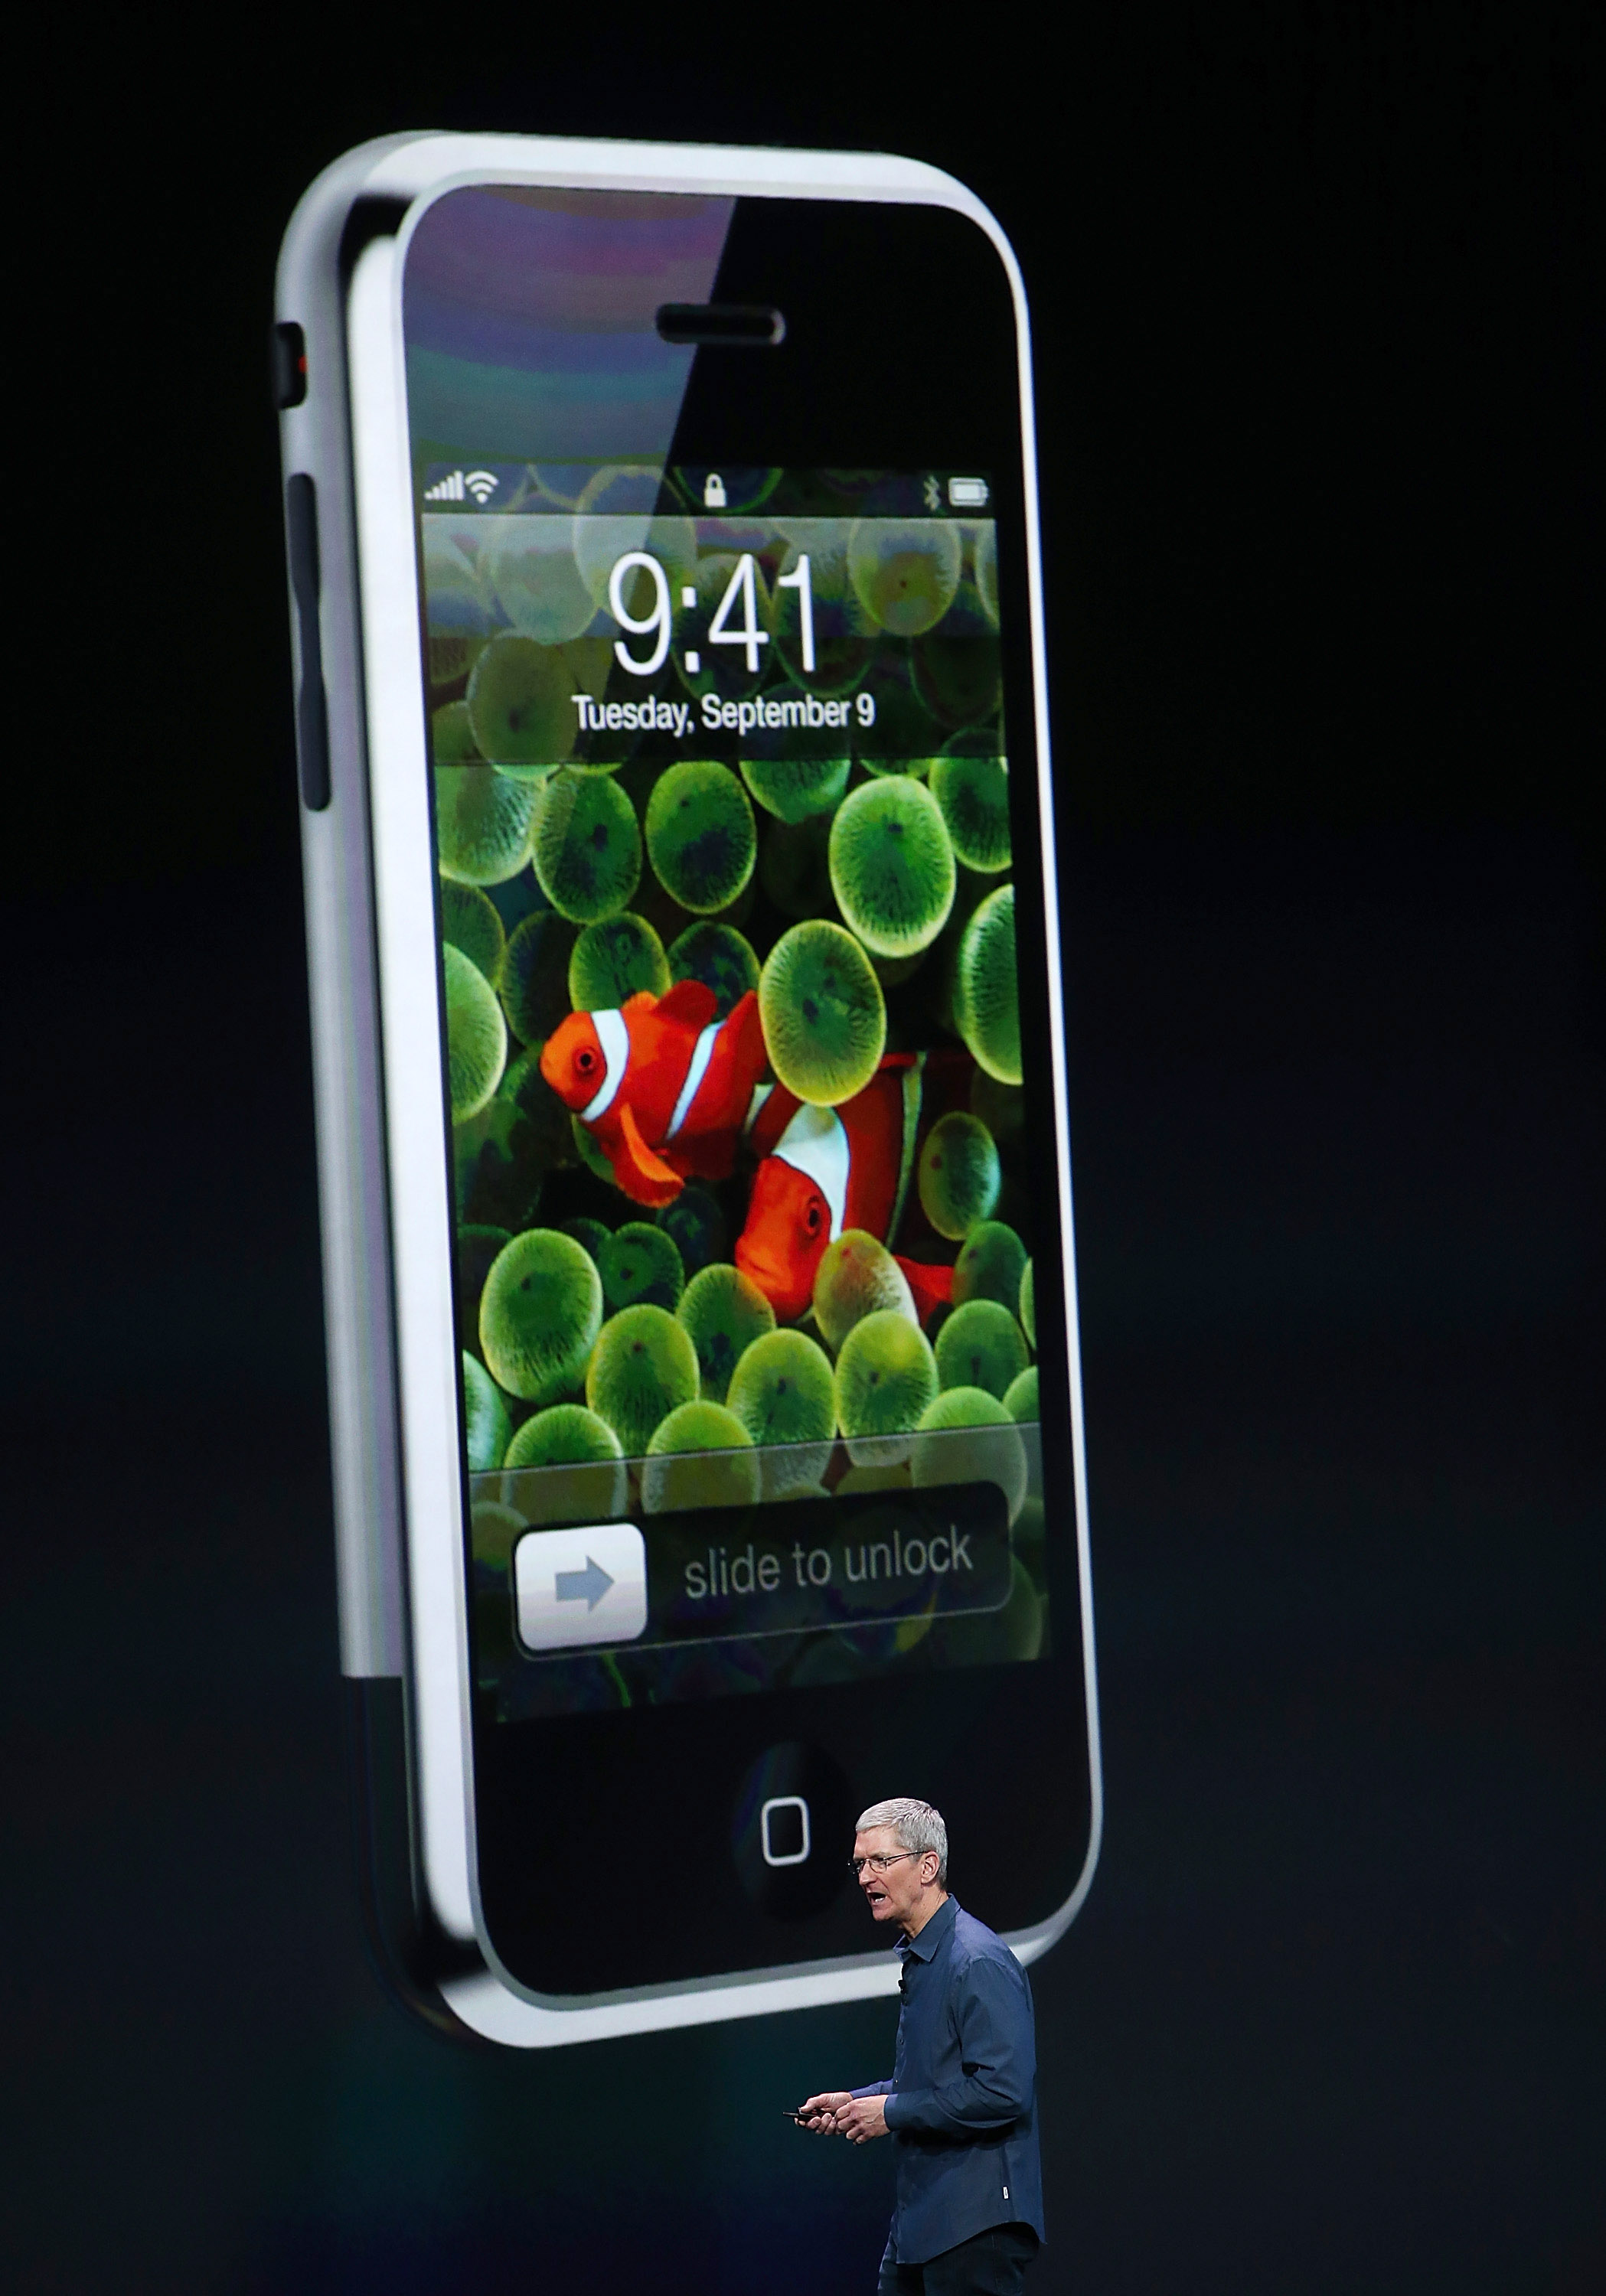 iphone, iphone 6, apple, apple keynote, iphone 6 event, iphone photos, iphone 6 plus, iphone pictures, new iphone